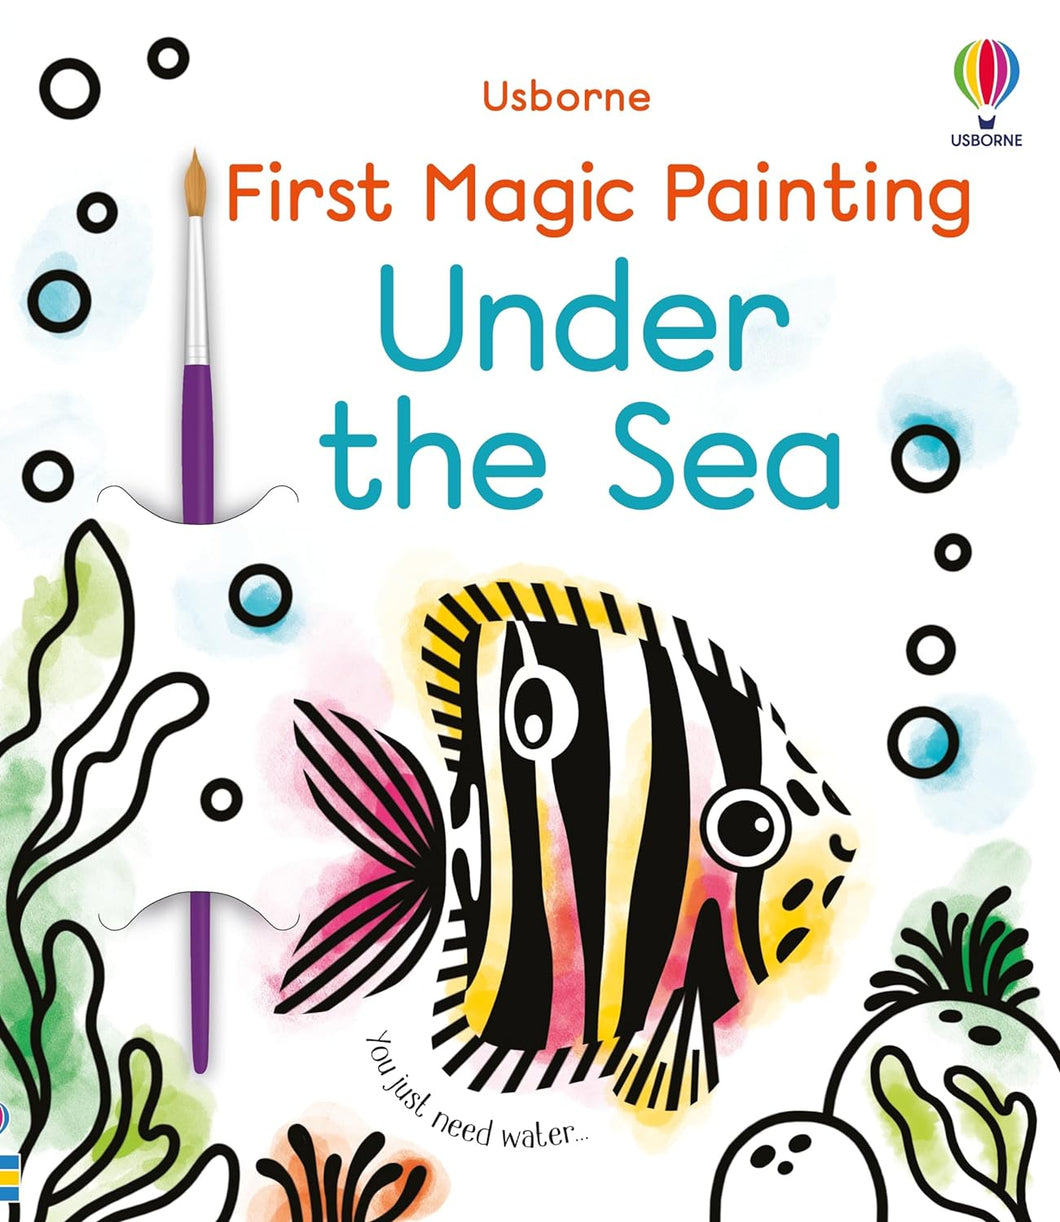 Usborne First Magic Painting Under the Sea Book